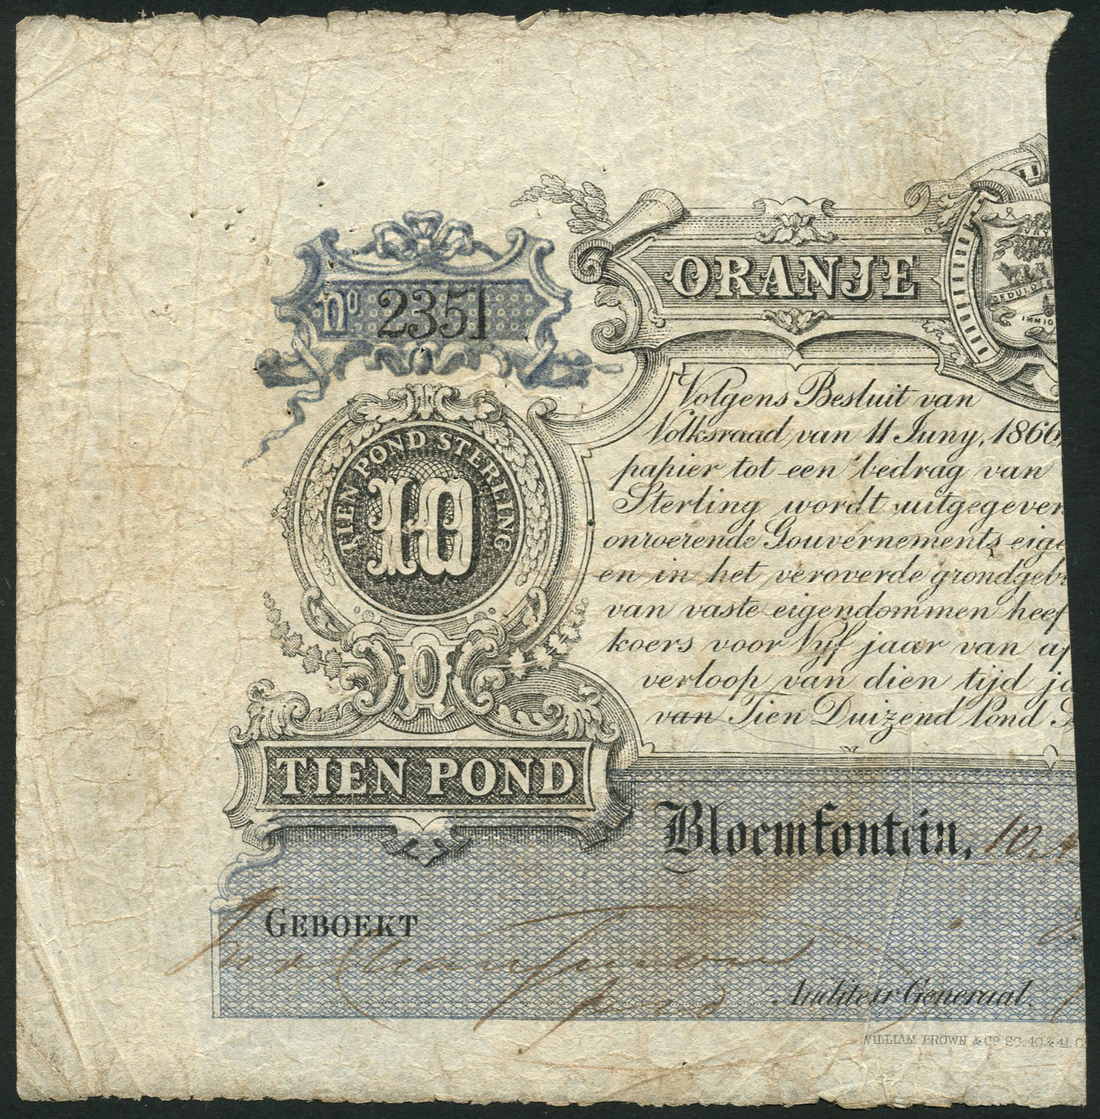 Orange Free State Government, £10, Bloemfontein, ND (1866 Issue), serial number 2351, black on